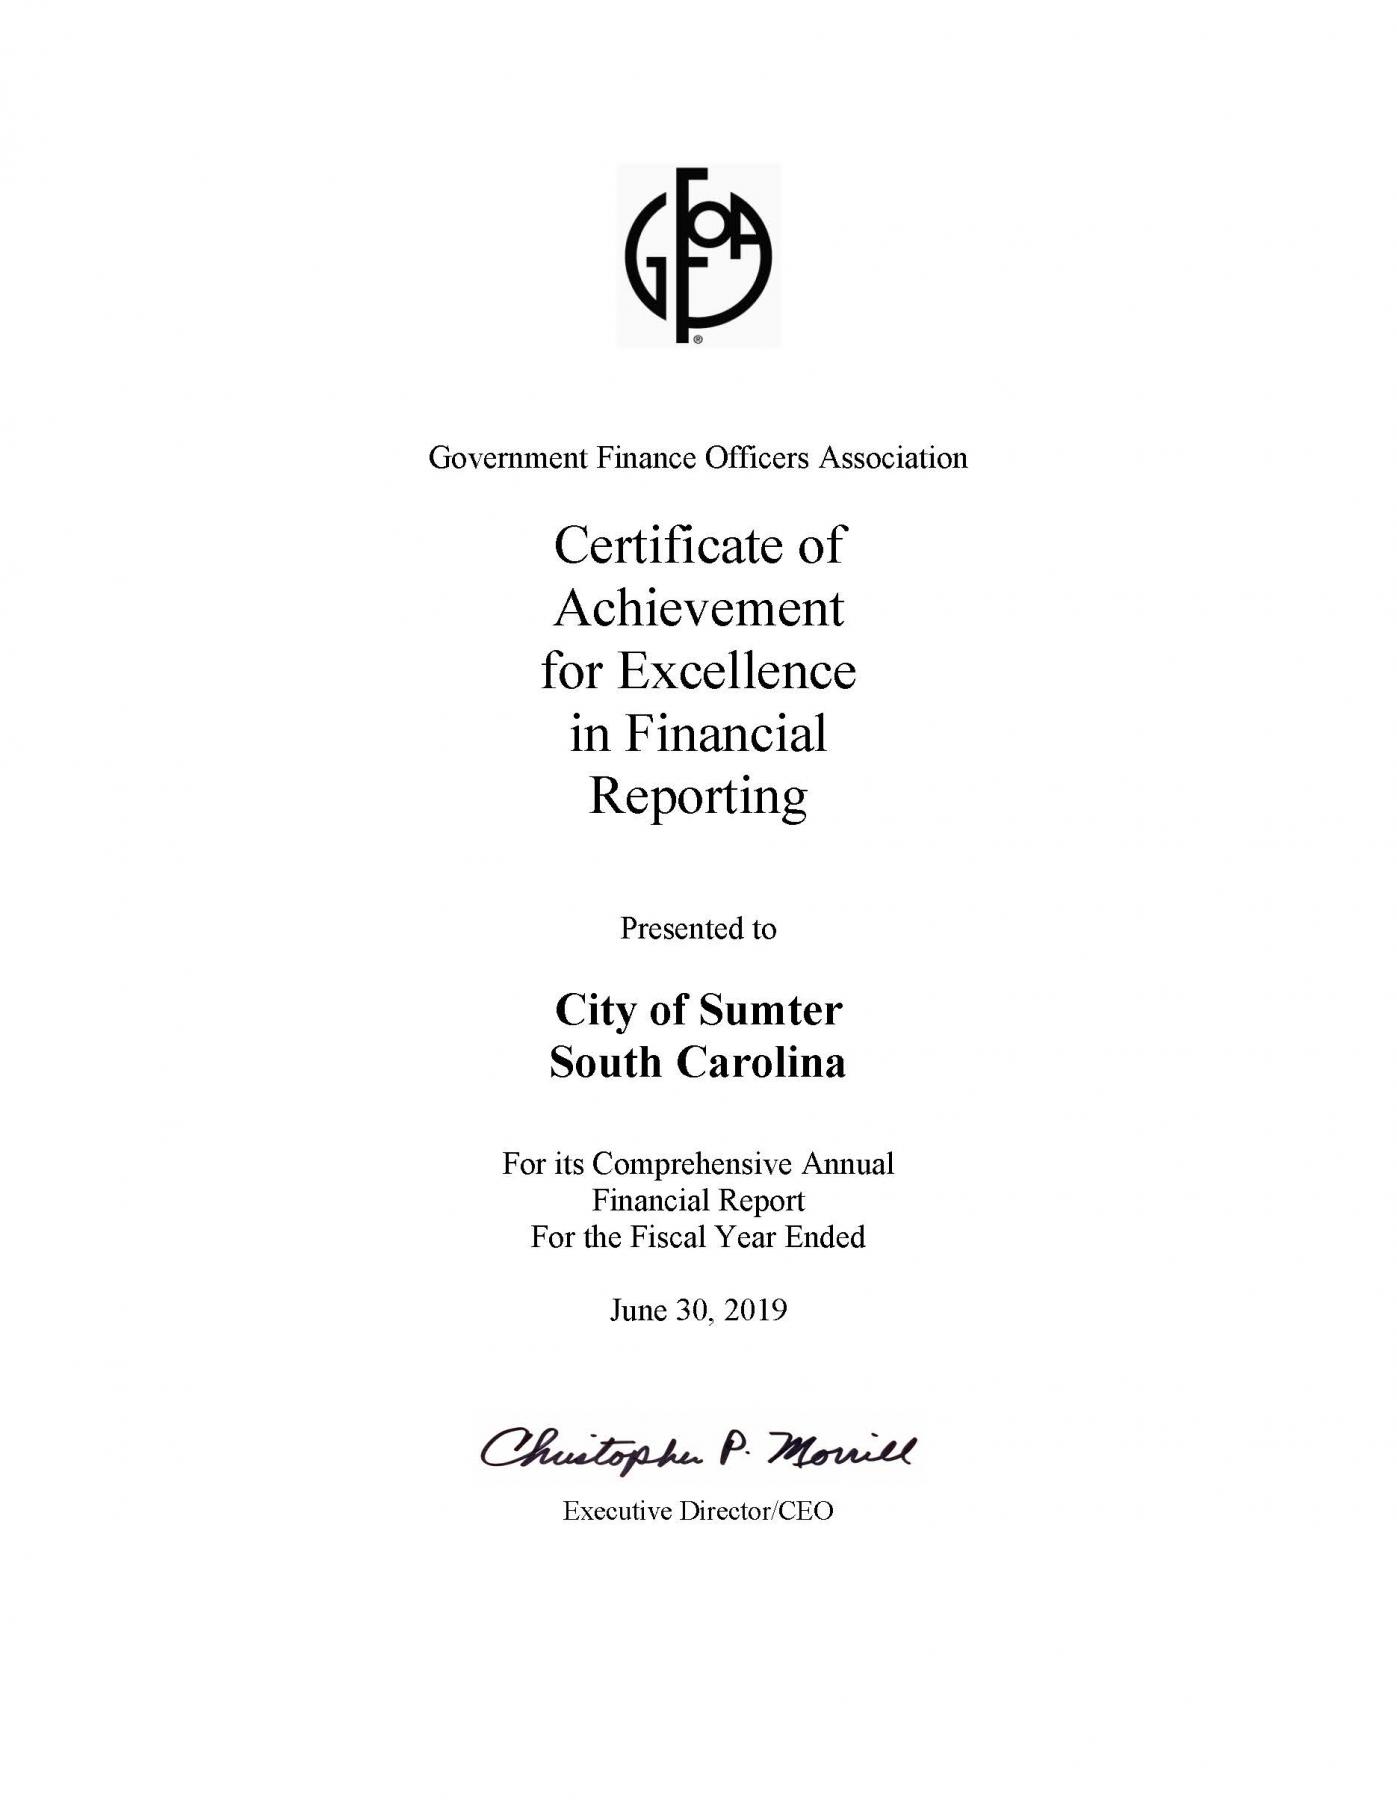 GFOA Certificate of Achievement for Excellence in Financial Reporting